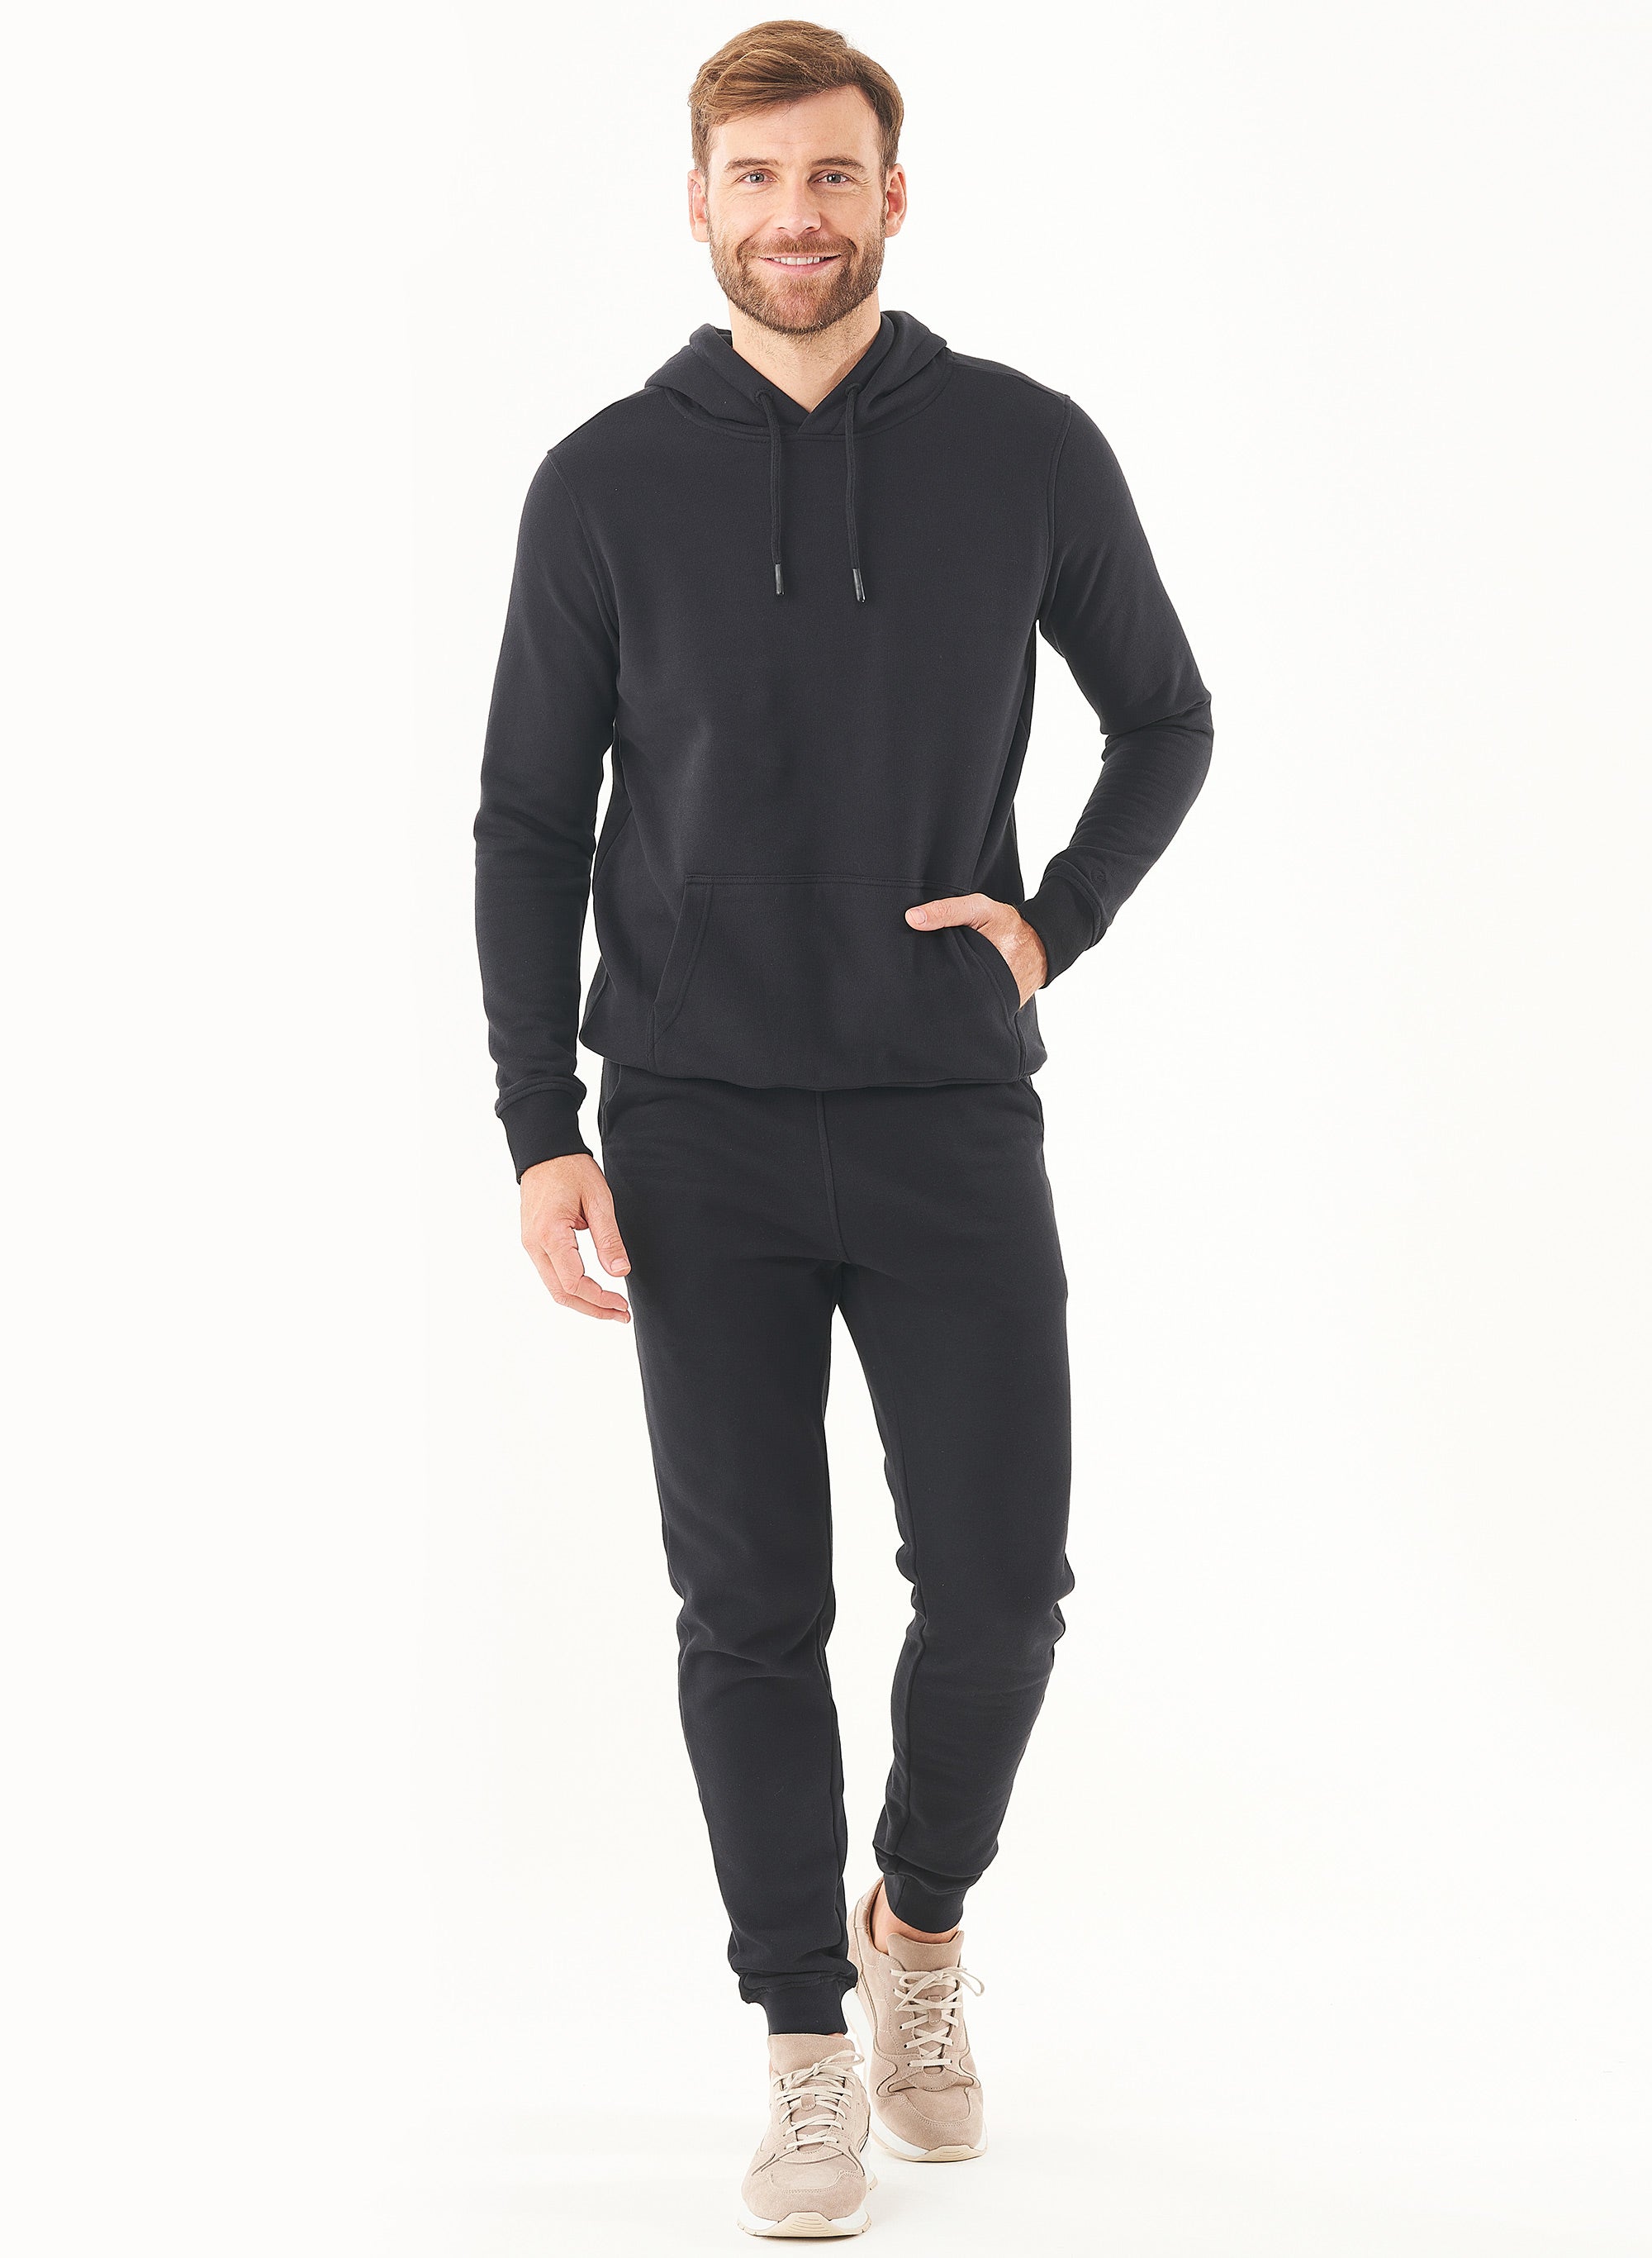 Hoodie Soft Touch Black 2